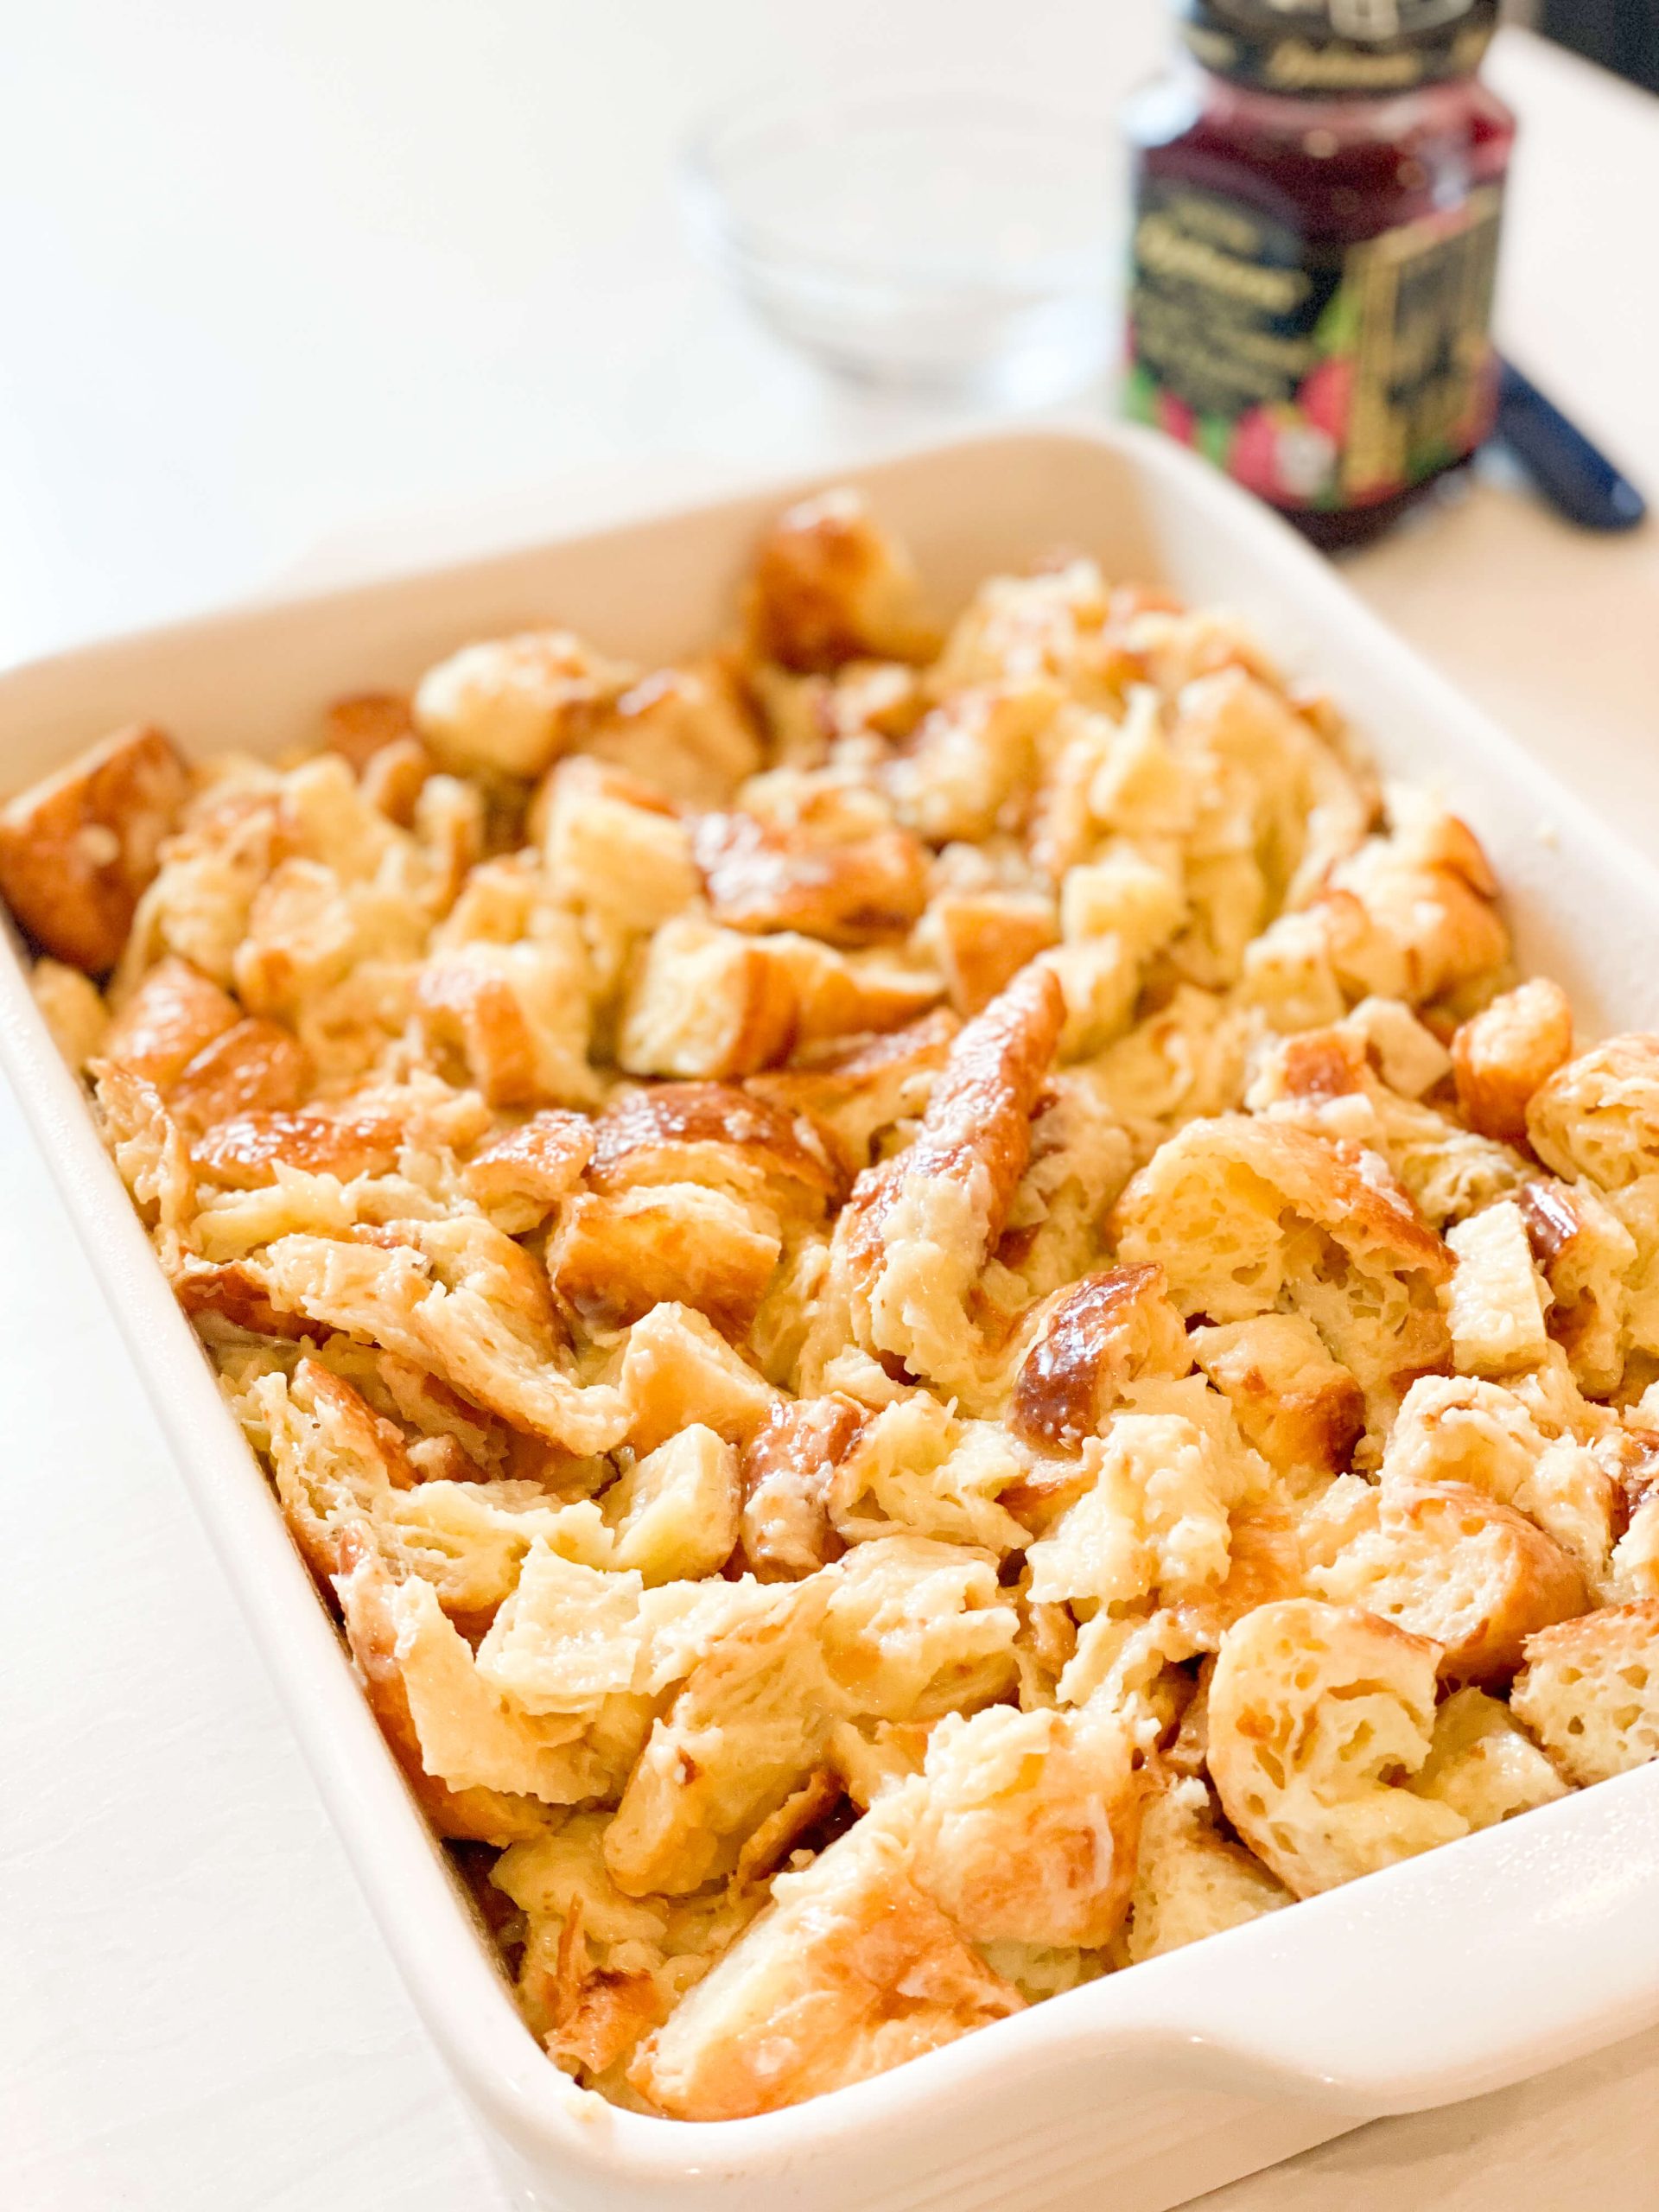 Bread pudding in baking dish